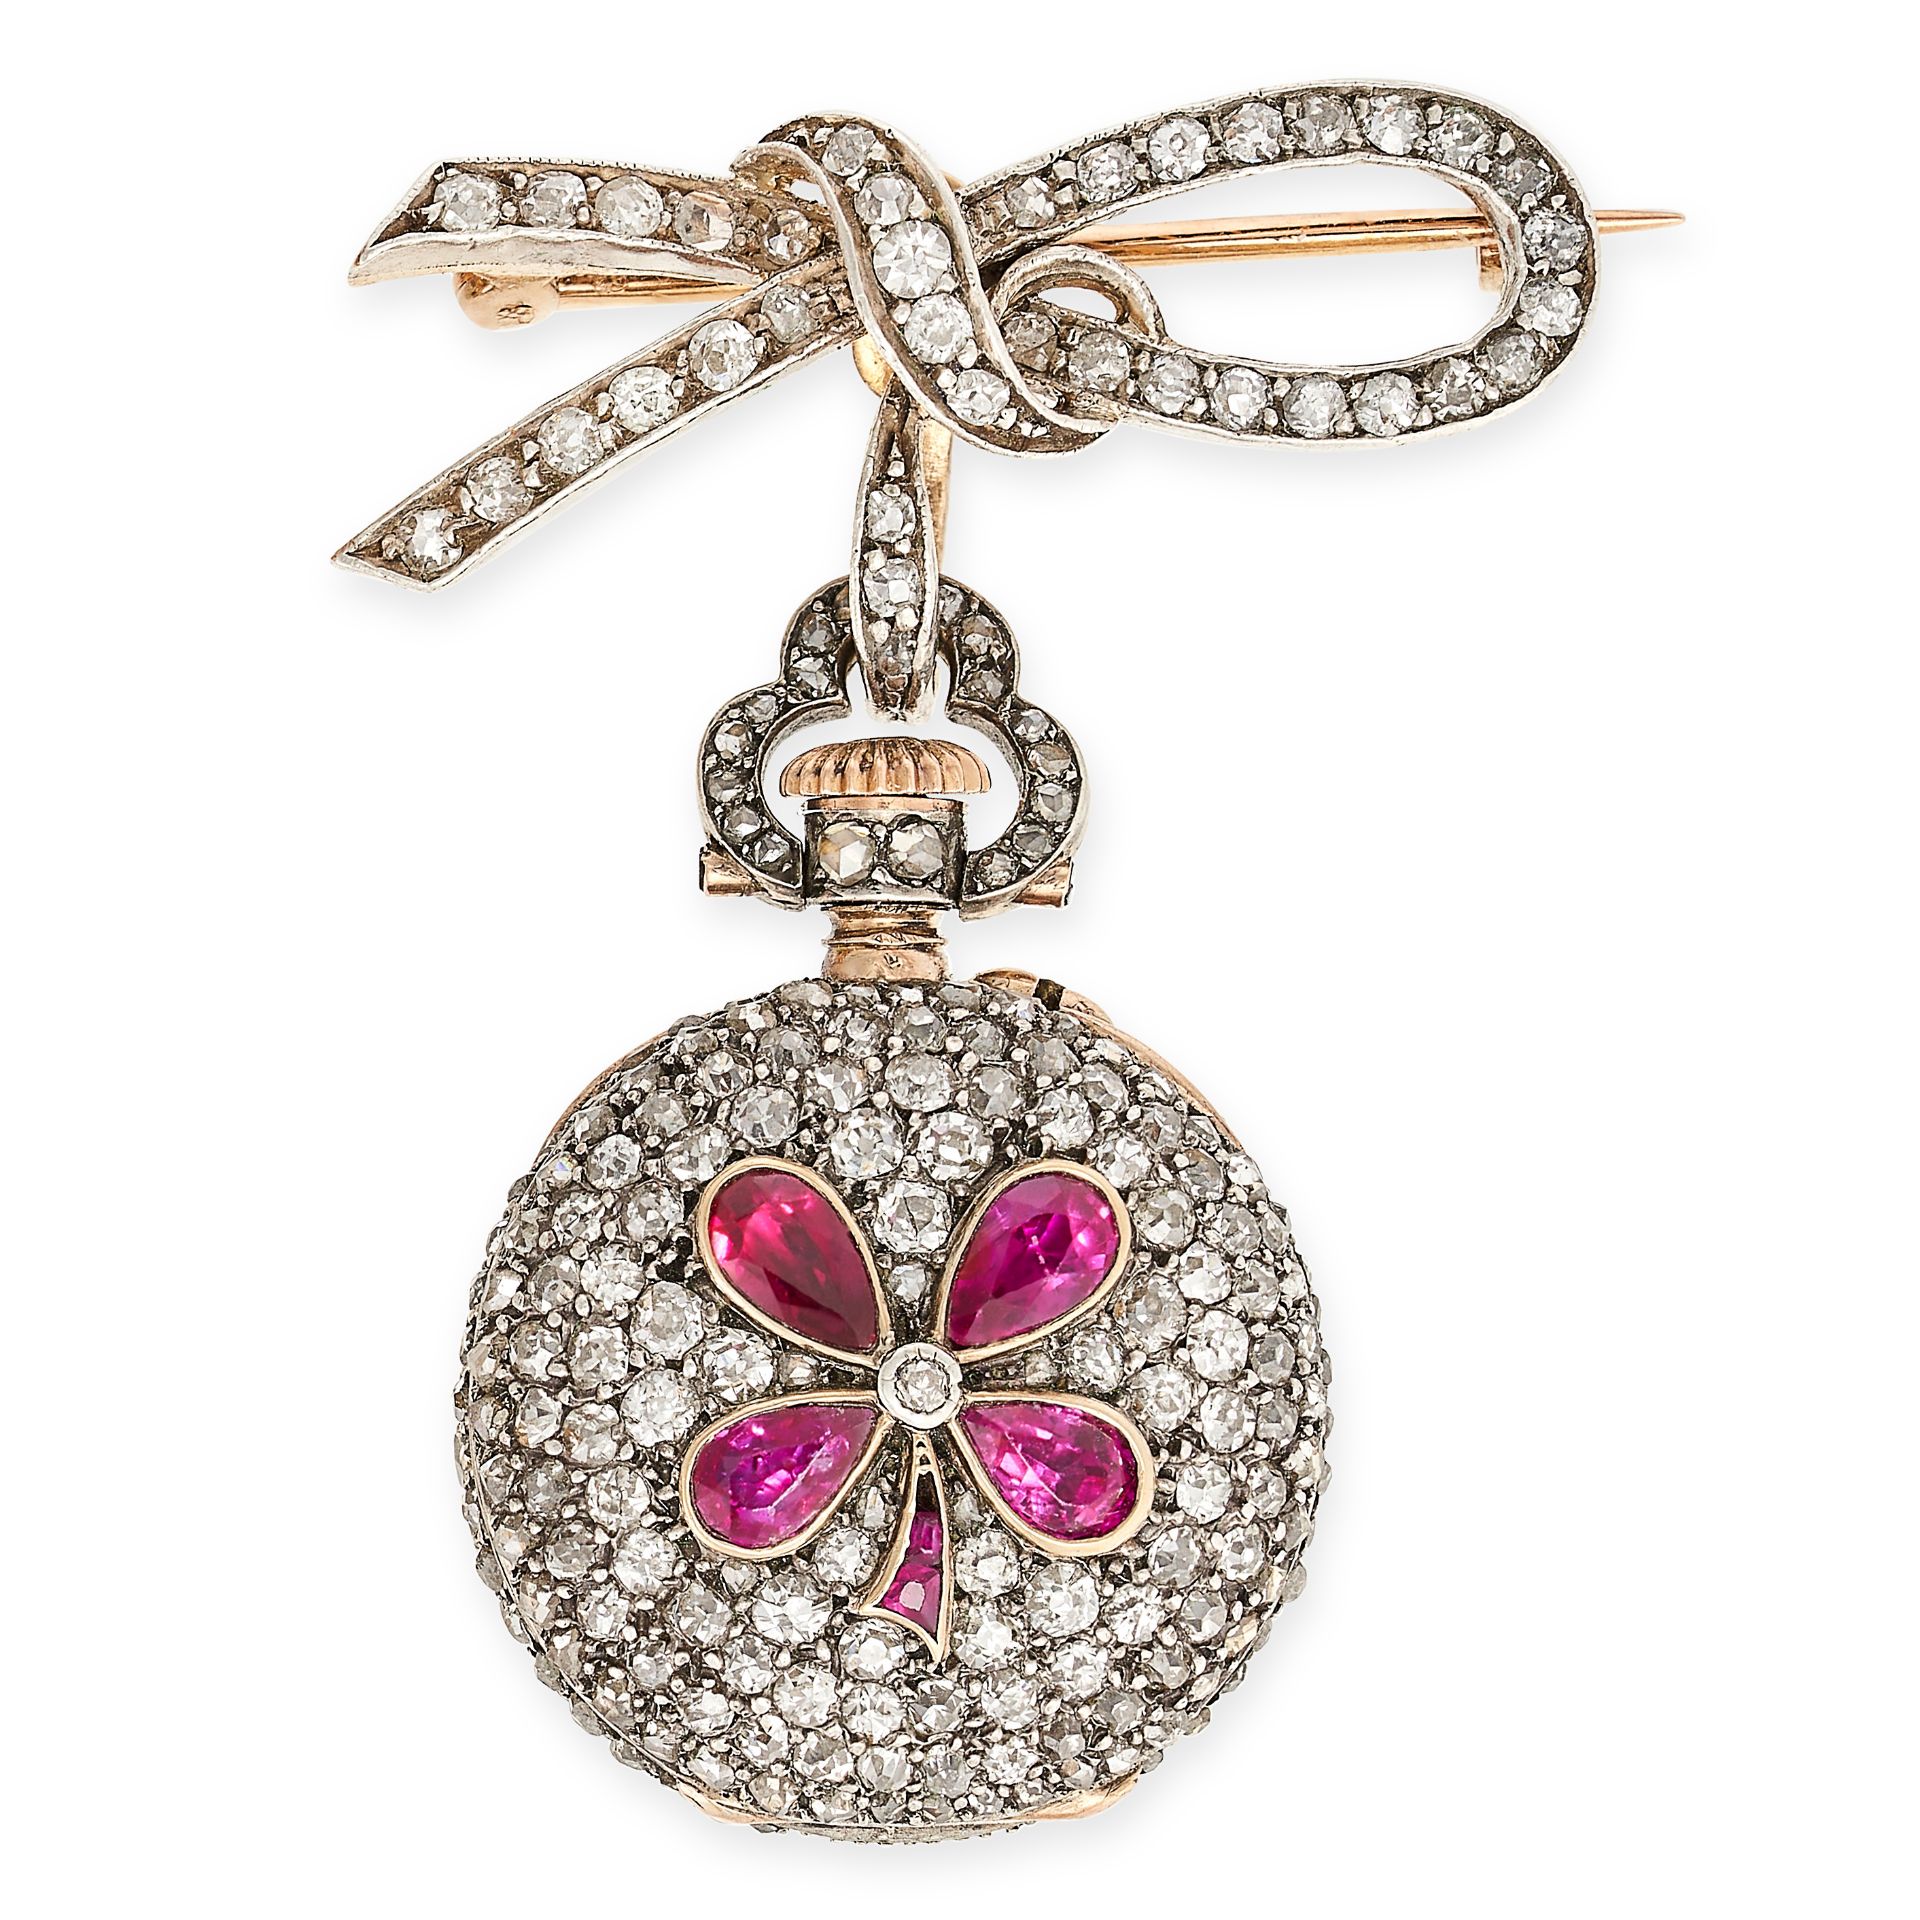 AN ANTIQUE FRENCH RUBY AND DIAMOND POCKET WATCH in 18ct yellow gold and silver, the hinged case w...